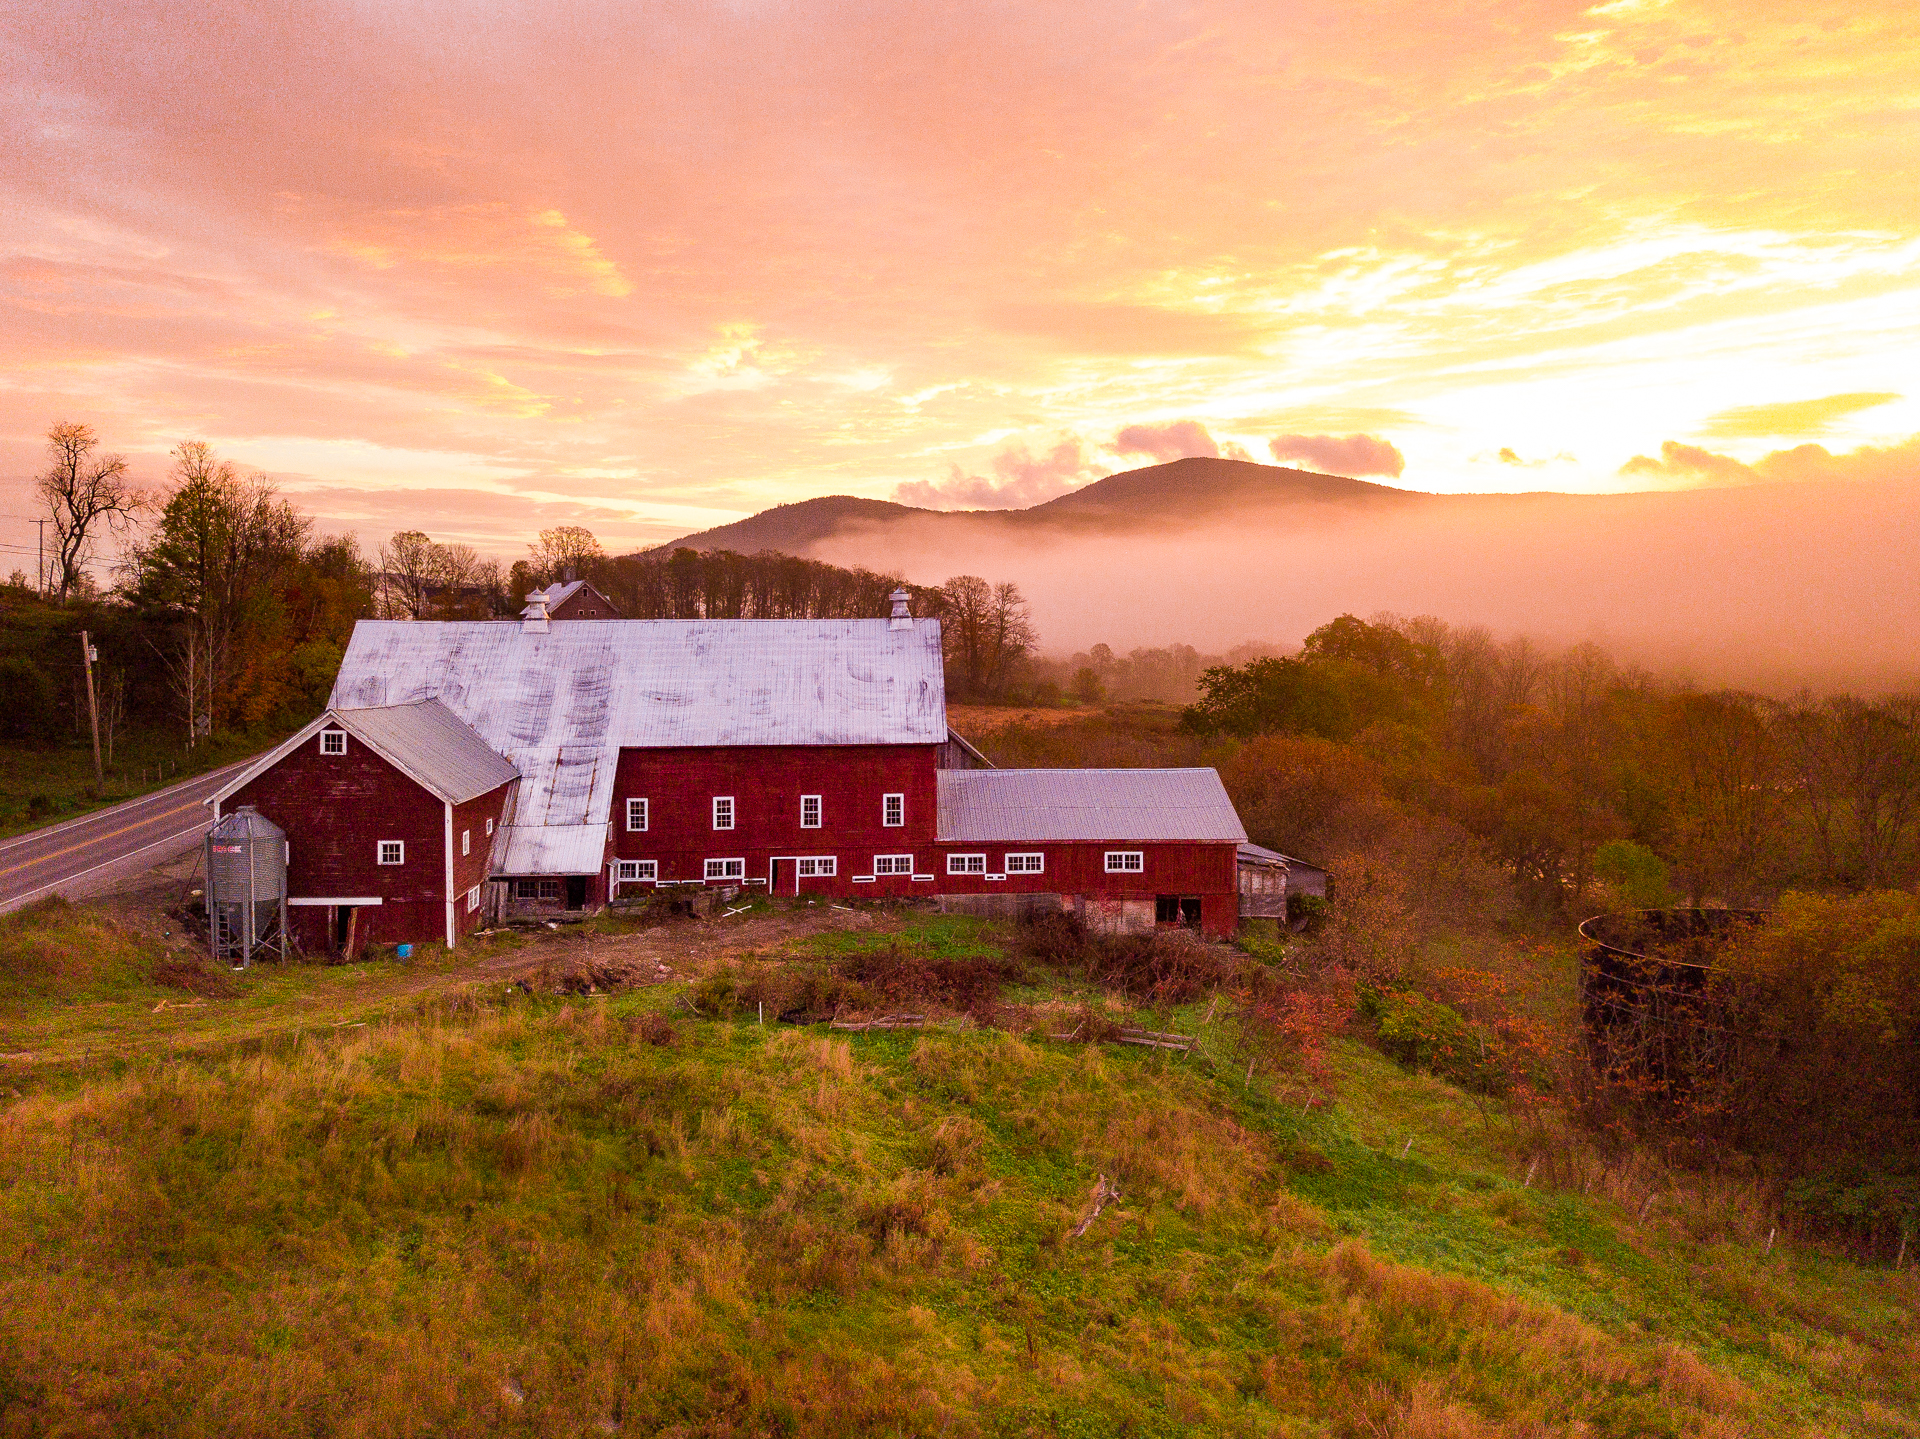 Finding Fall in Waitsfield, Vermont